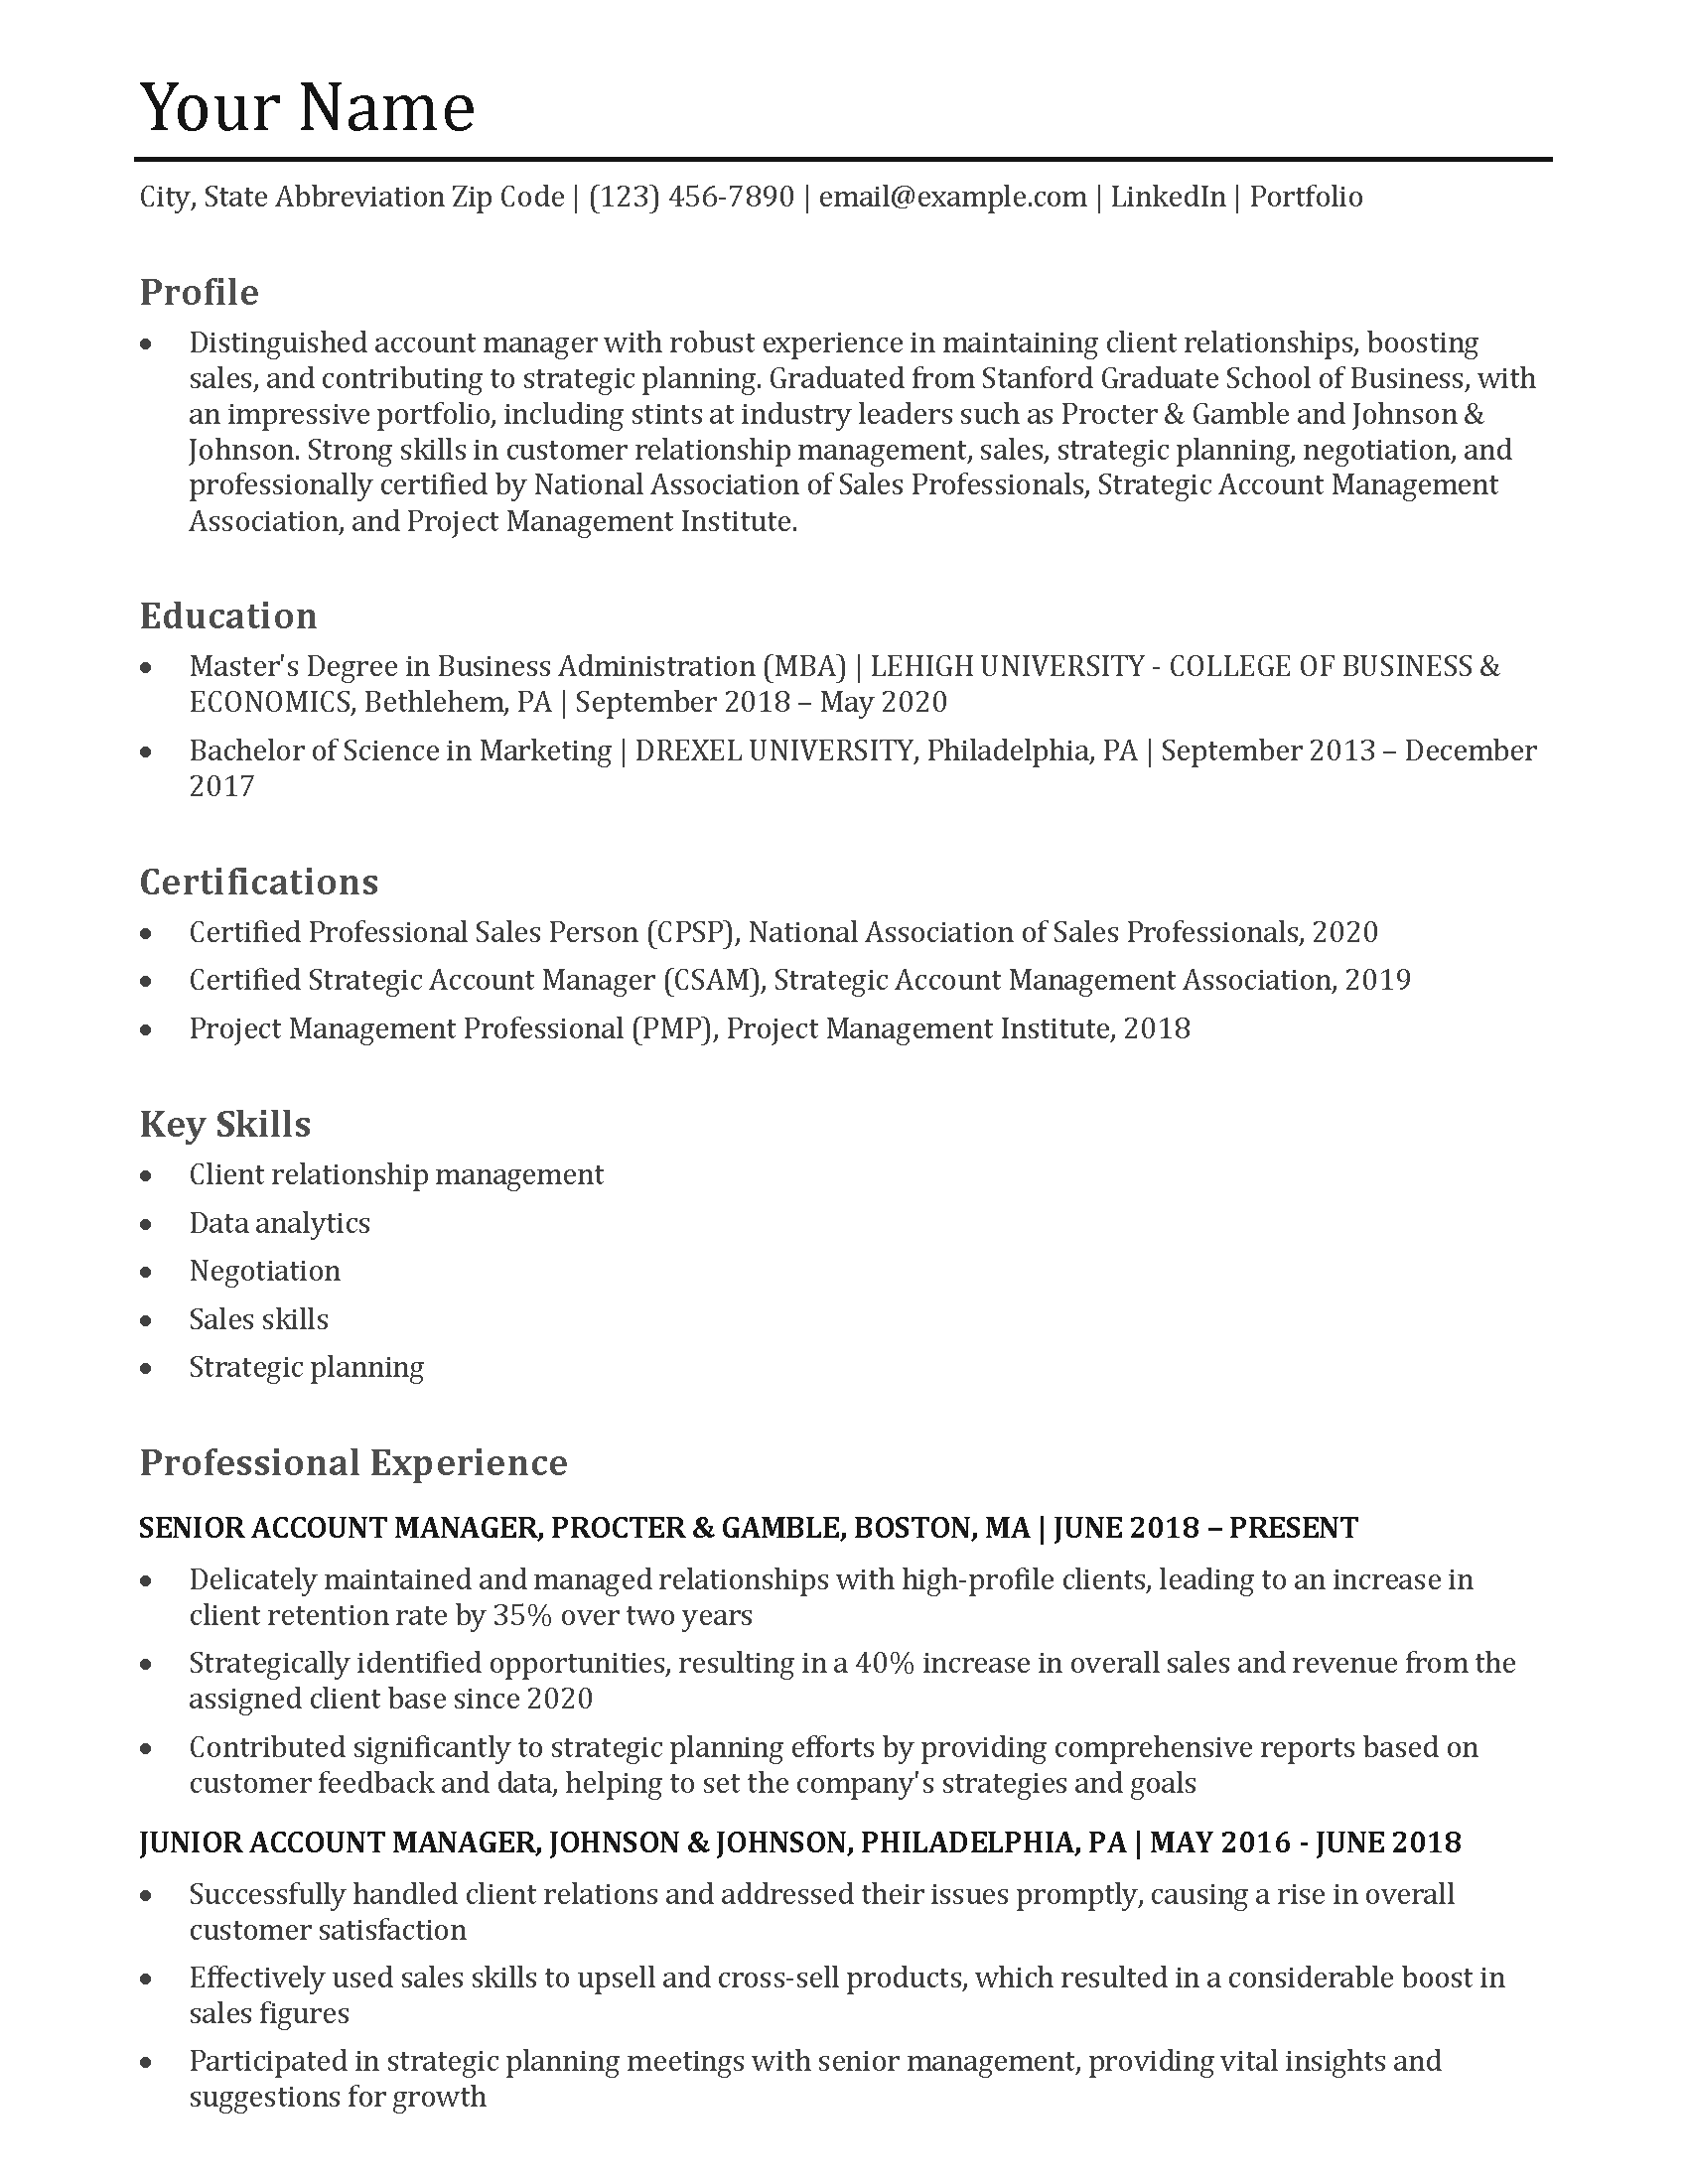 Account Manager Resume Templates and Examples